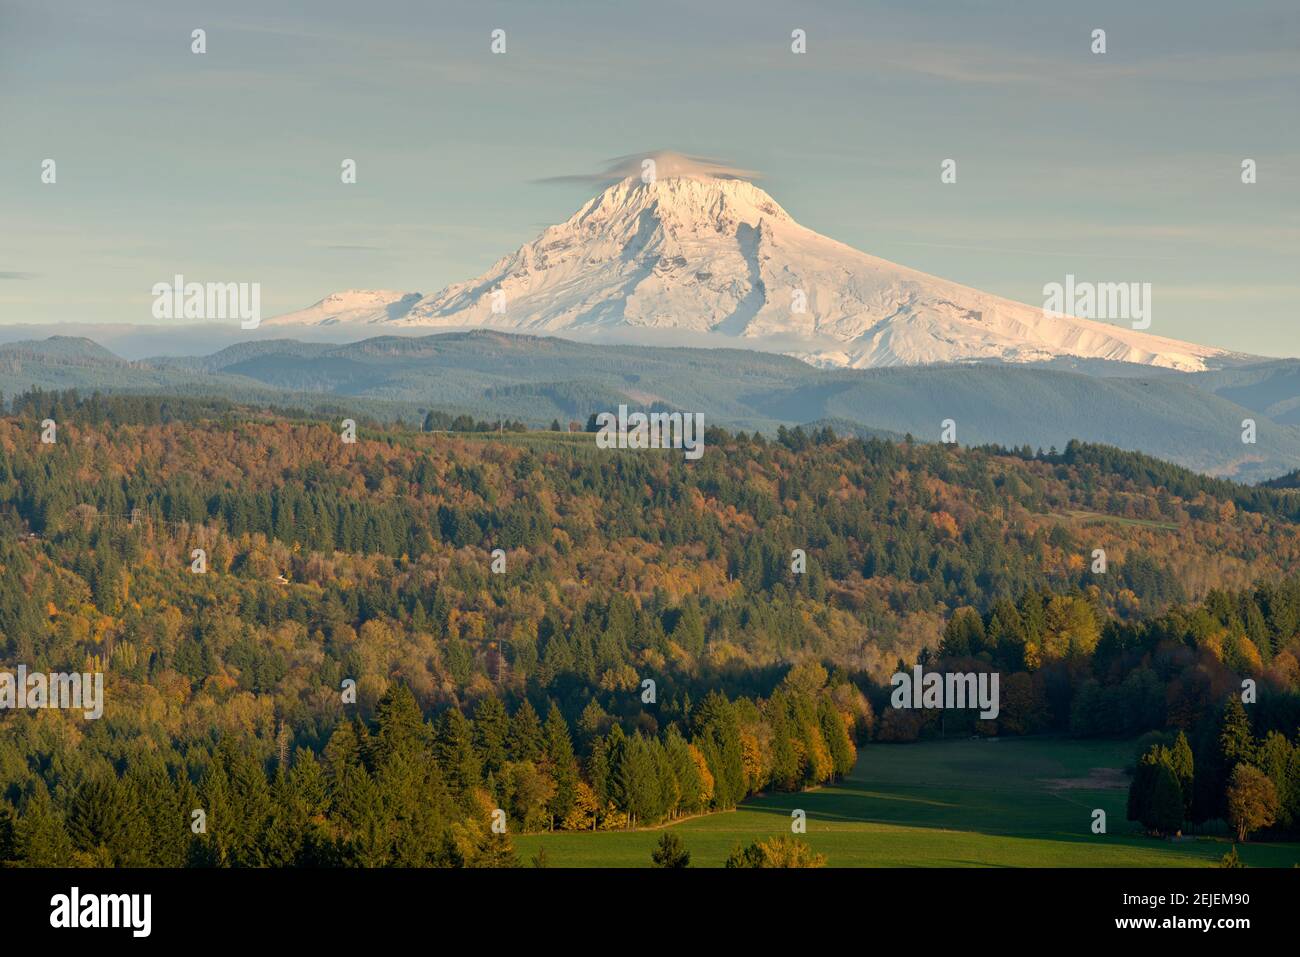 Trees on a landscape with mountain in the background, Mt Hood, Jonsrud Viewpoint, Sandy, Clackamas County, Oregon, USA Stock Photo